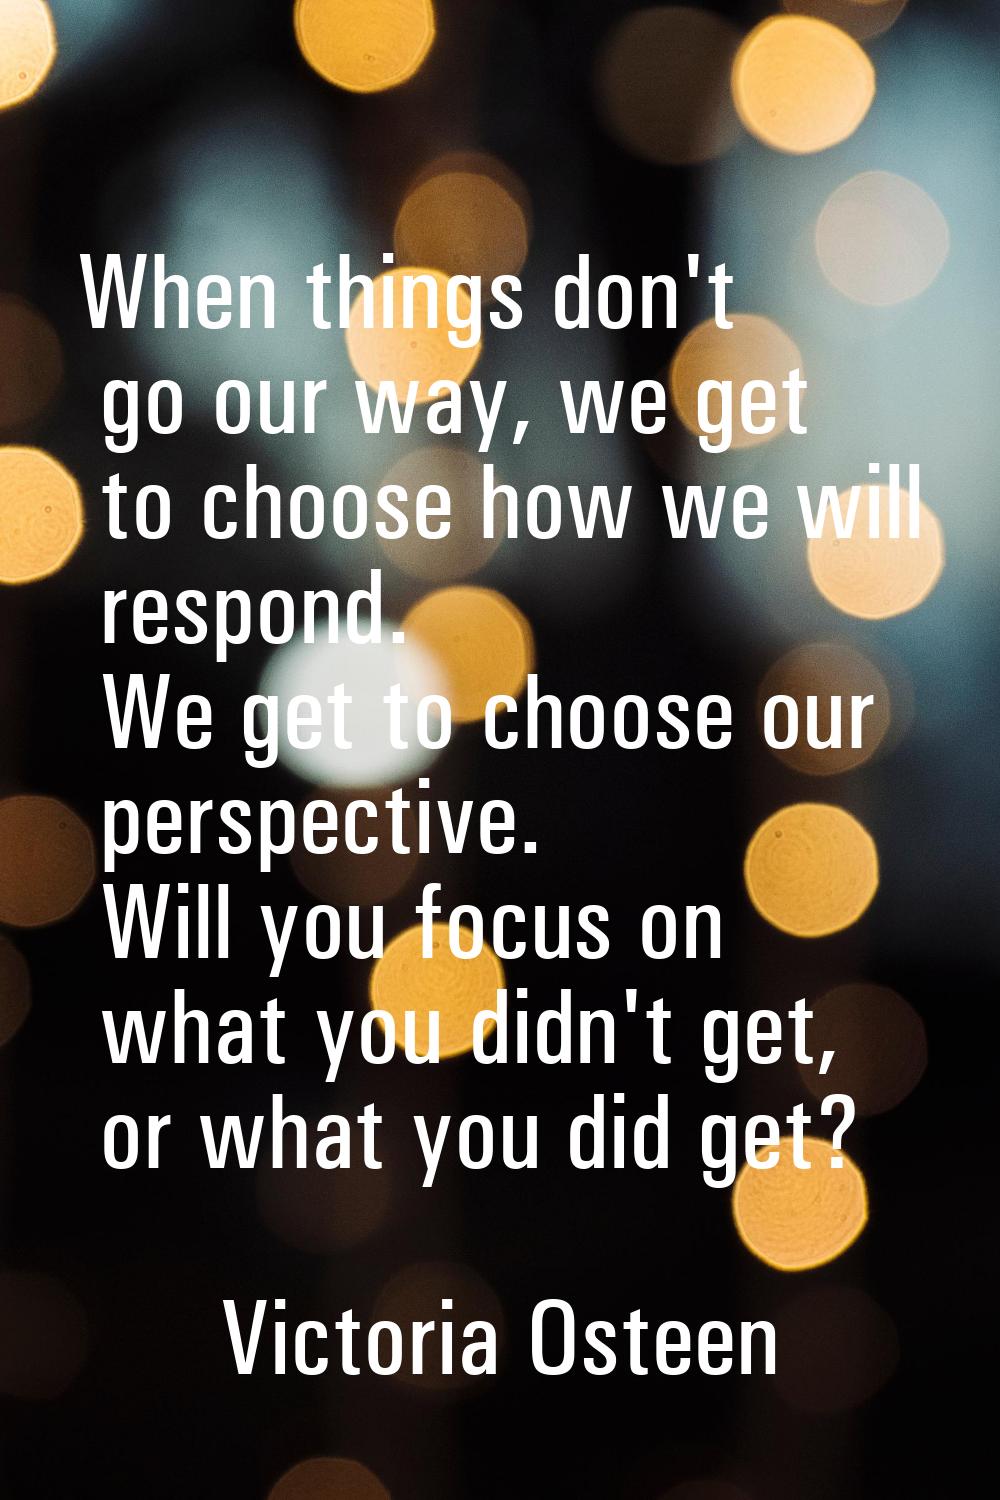 When things don't go our way, we get to choose how we will respond. We get to choose our perspectiv